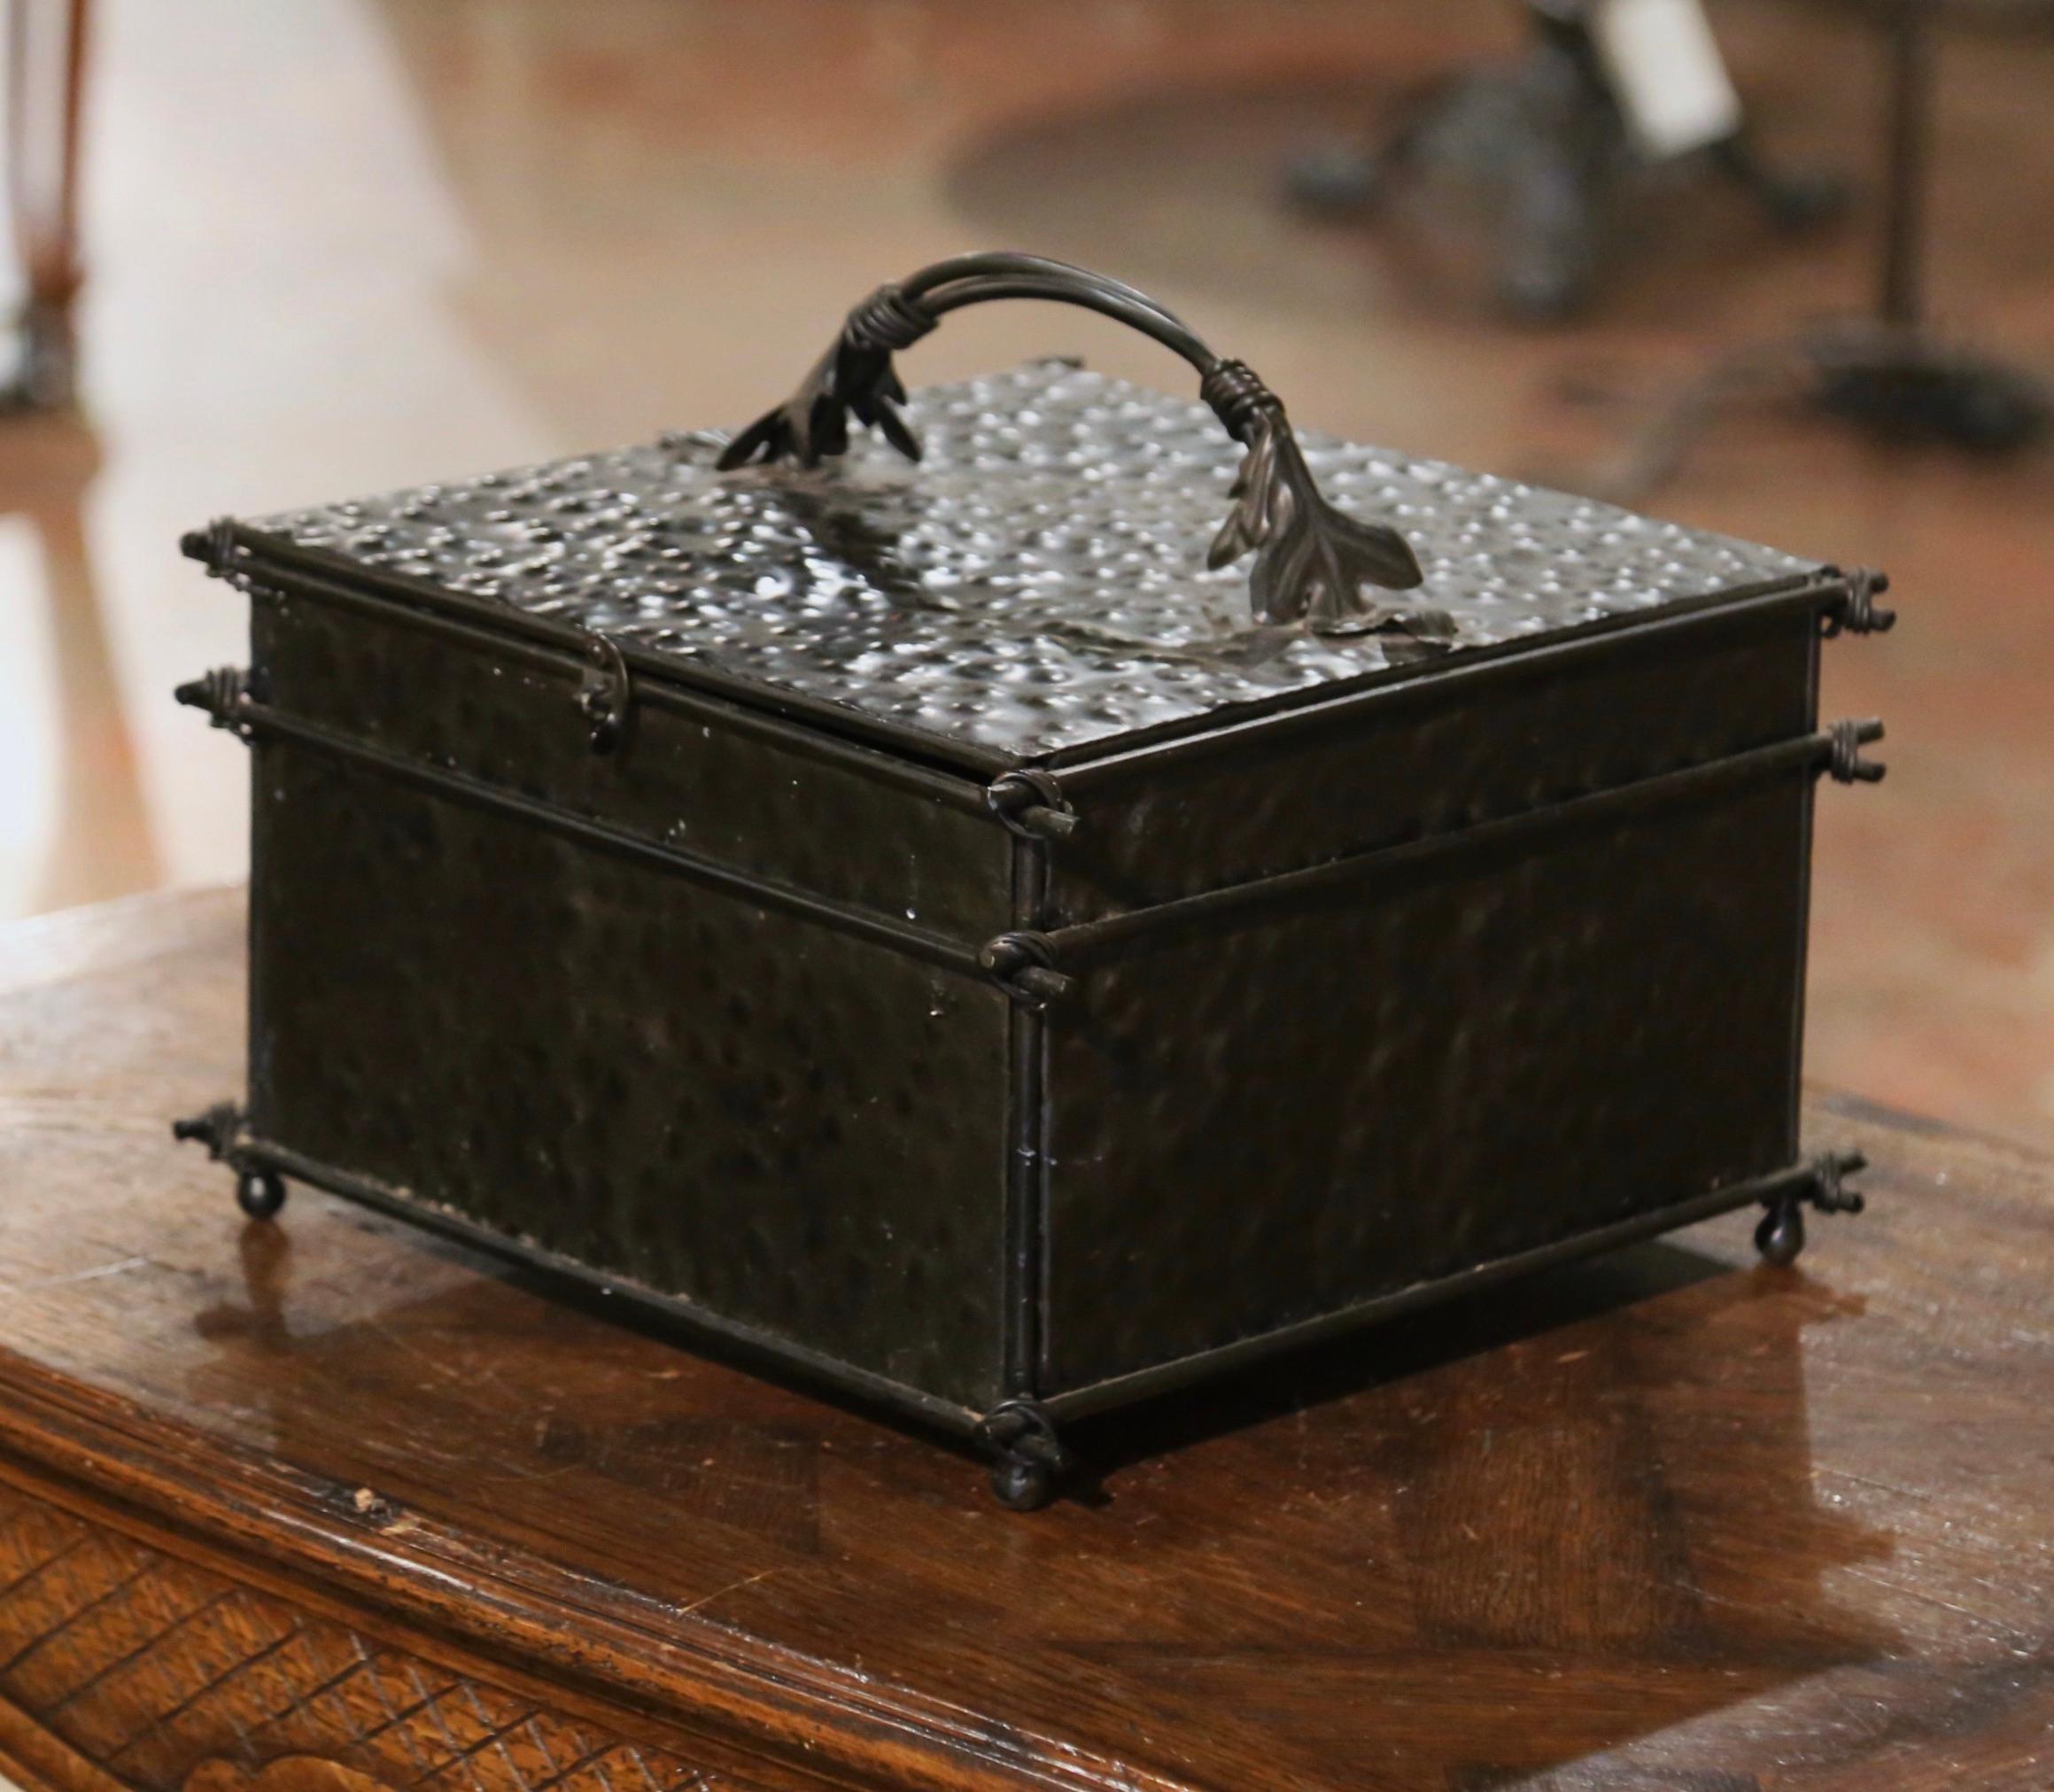 This beautifully executed square box crafted circa 1990 is embellished with a handle made into a twisted branch form with a leaf accented on either side, a latch on the front firmly secures the top. The small container features hammered iron with